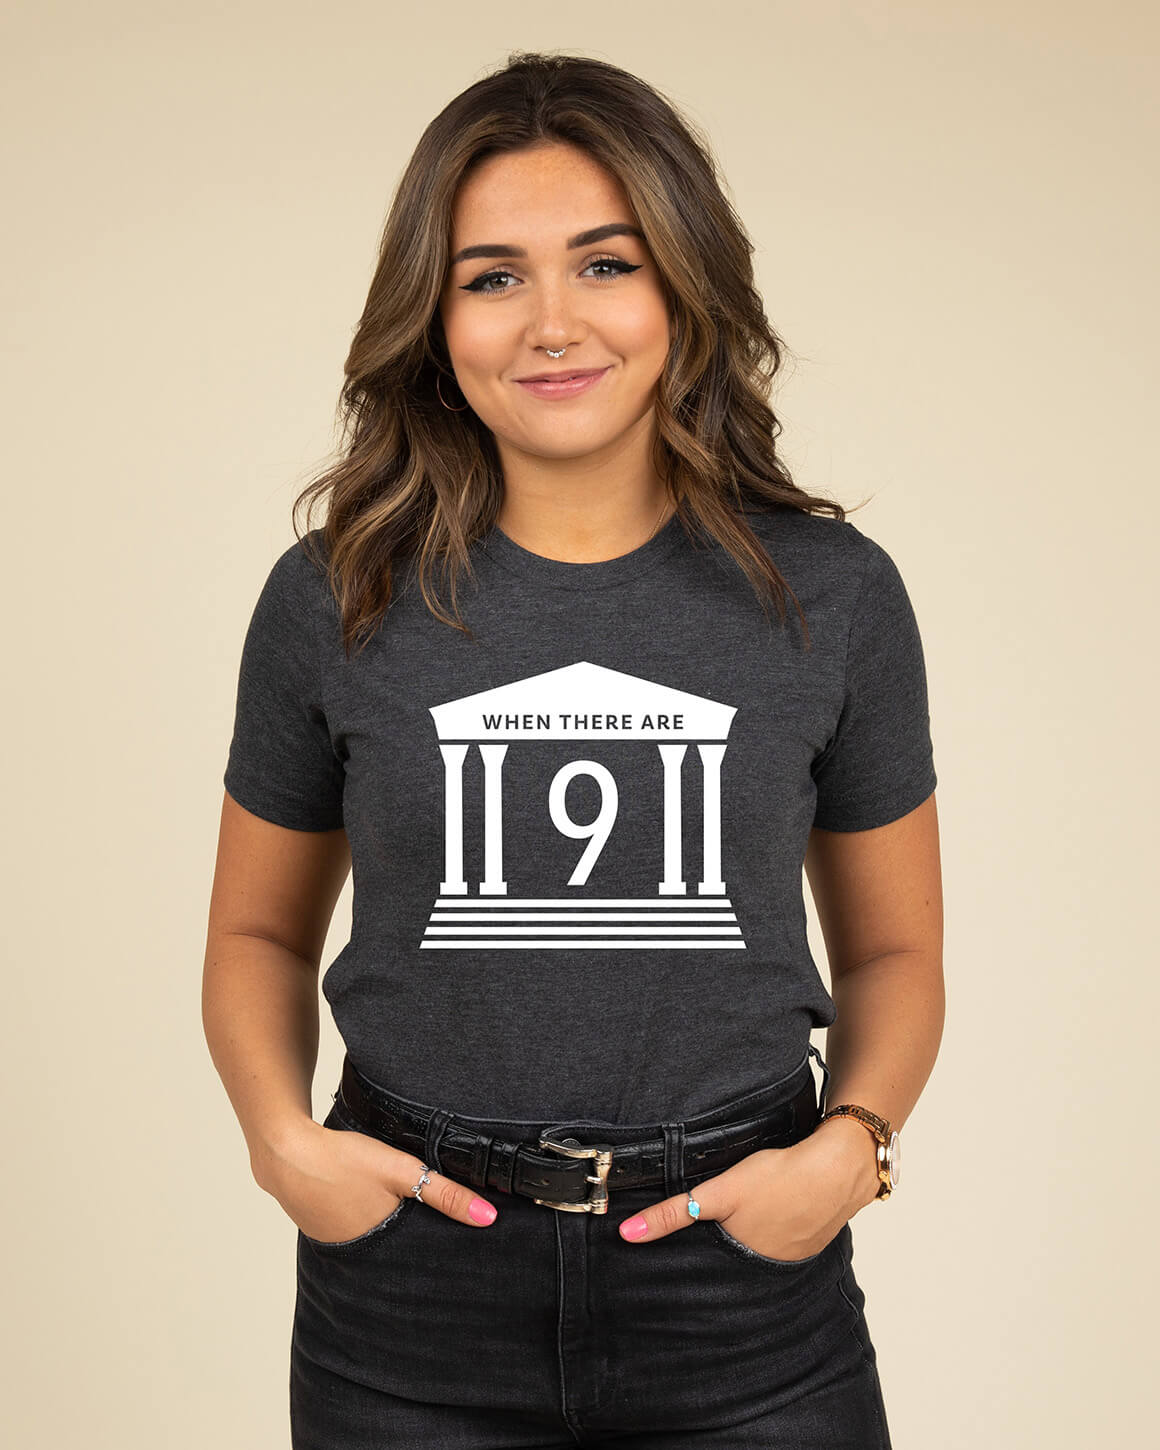 Young woman smiling and wearing gray RBG when there are nine (9) t shirt